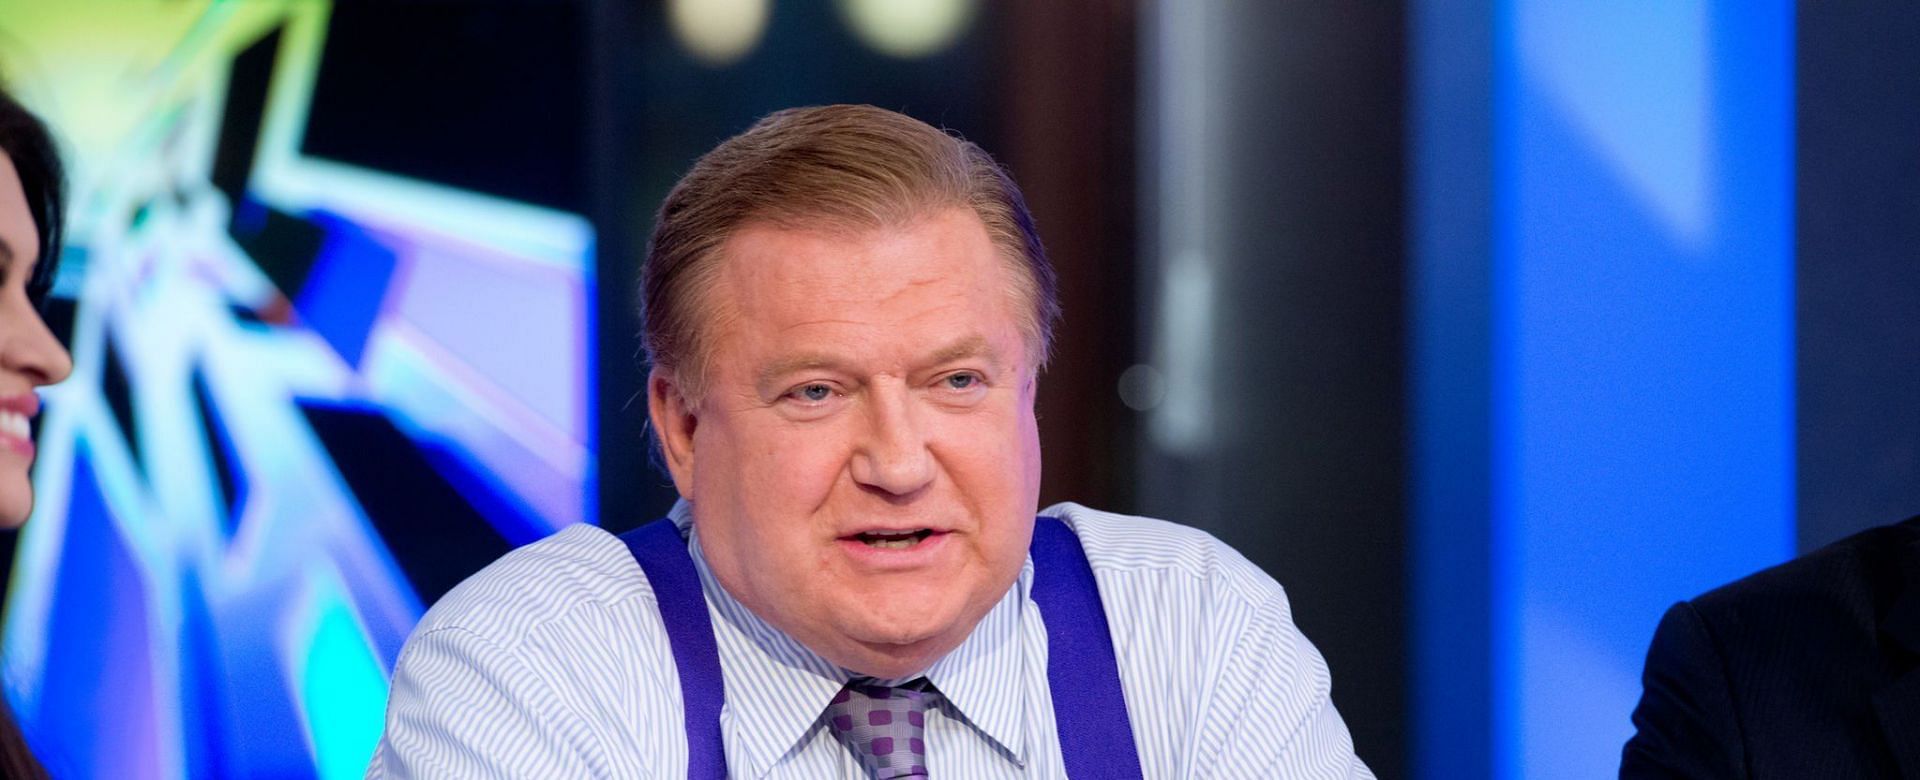 Bob Beckel joined Fox News as a host of &#039;The Five&#039; in 2011 (Image via Noam Galai/Getty Images)